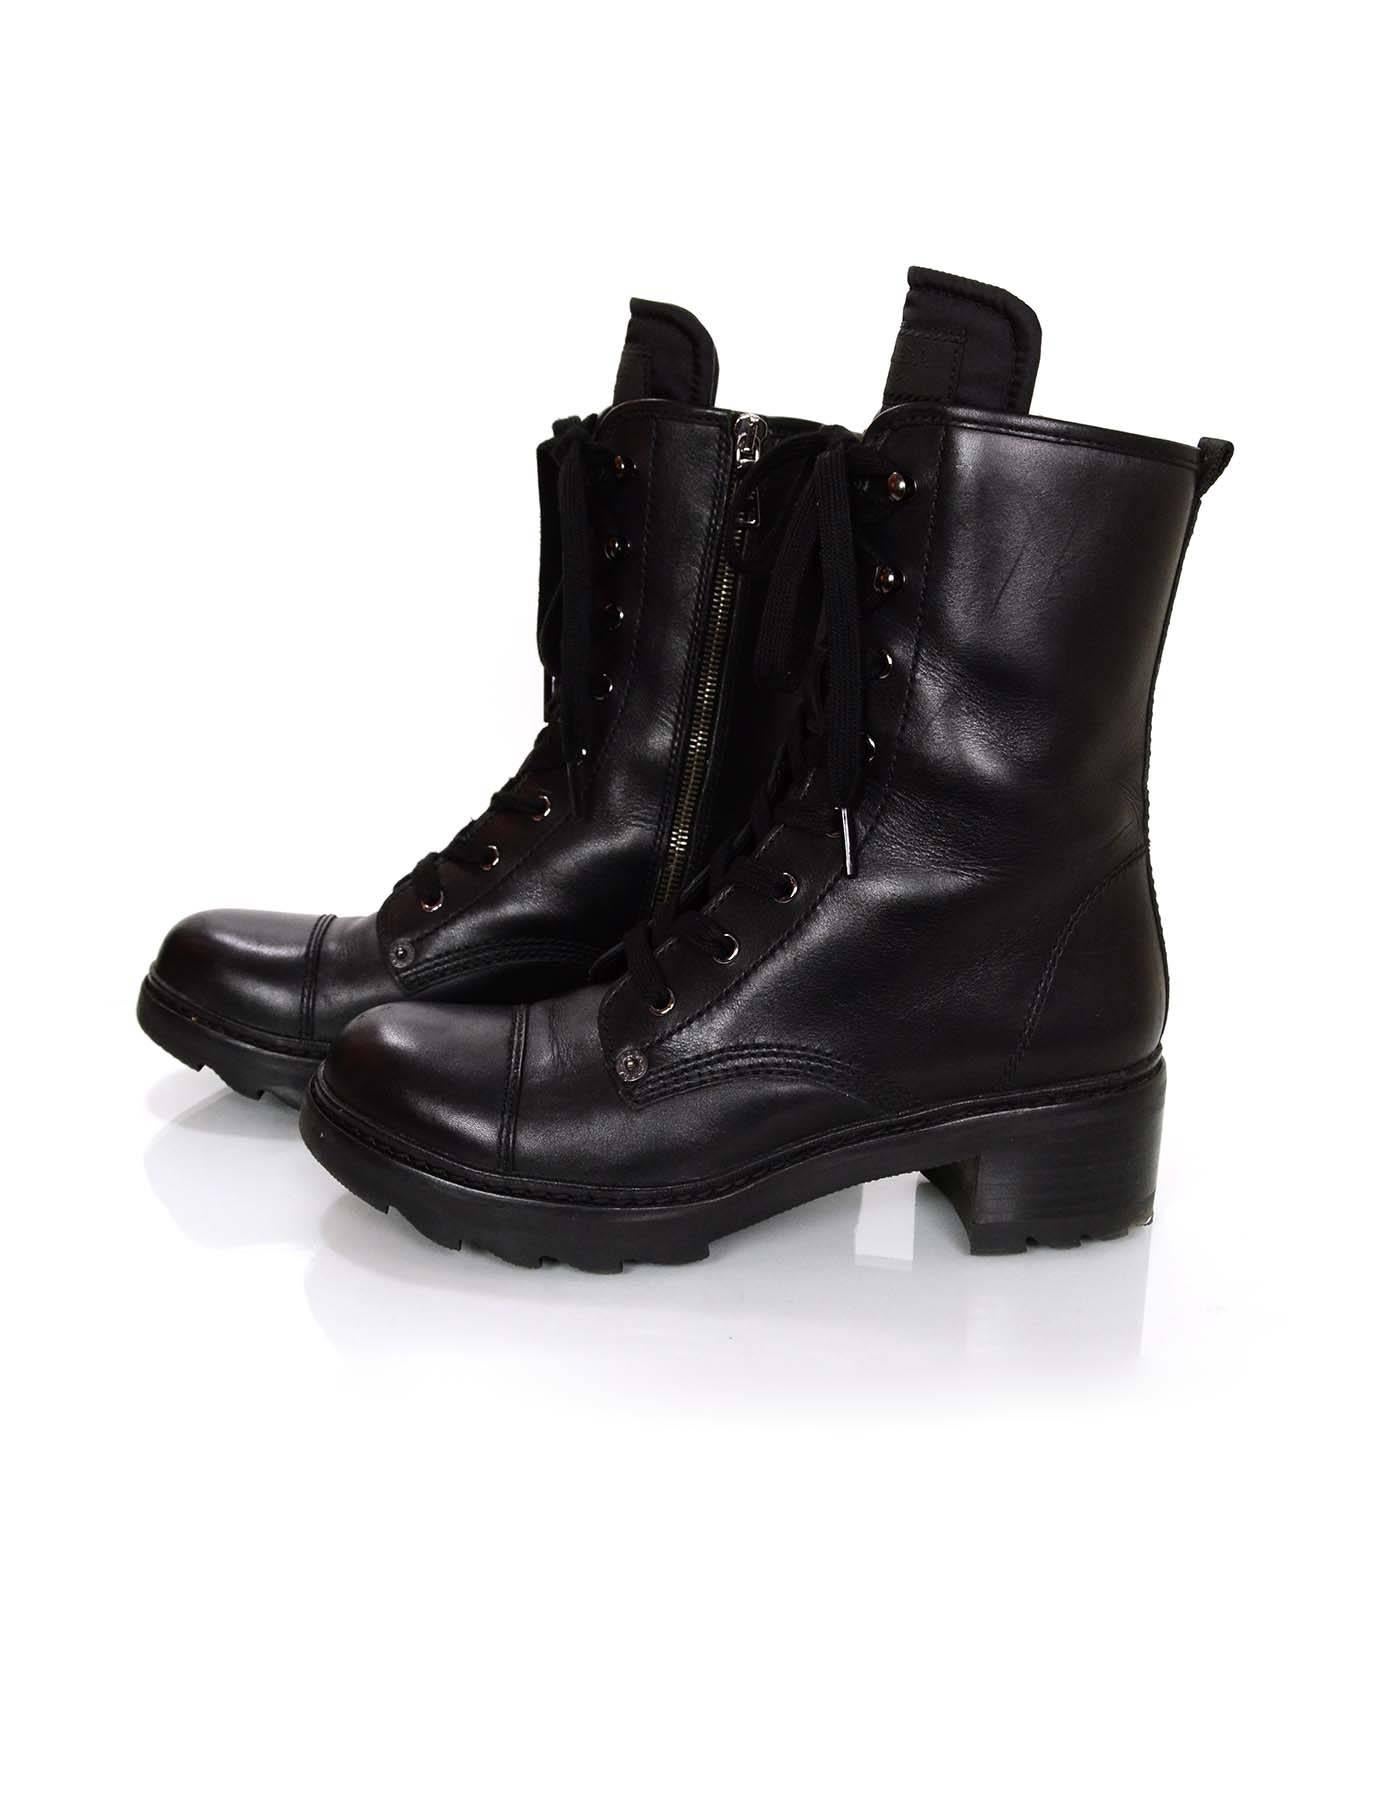 Prada Sport Black Leather Combat Boots Sz 38.5

Made In: Italy
Color: Black
Materials: Leather and rubber
Closure/Opening: Lace tie closure at front and zip closure at side
Sole Stamp: Prada 
Overall Condition: Excellent pre-owned condition